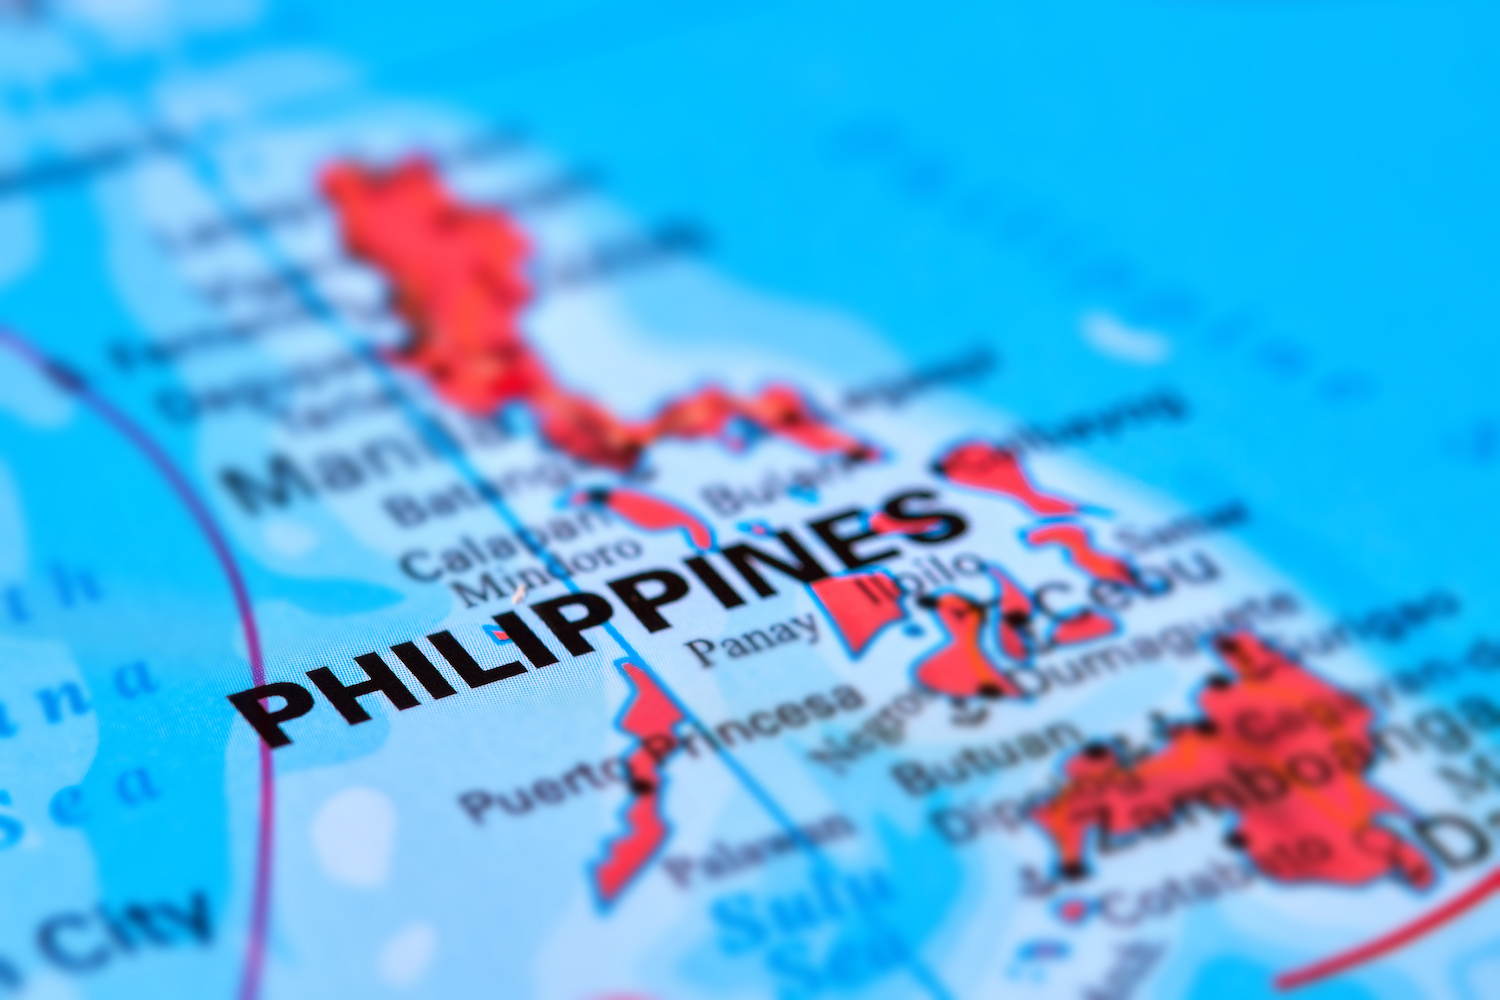 Philippines’ UnionBank Launches Stablecoin, Conducts Country’s First Bank Blockchain Transaction